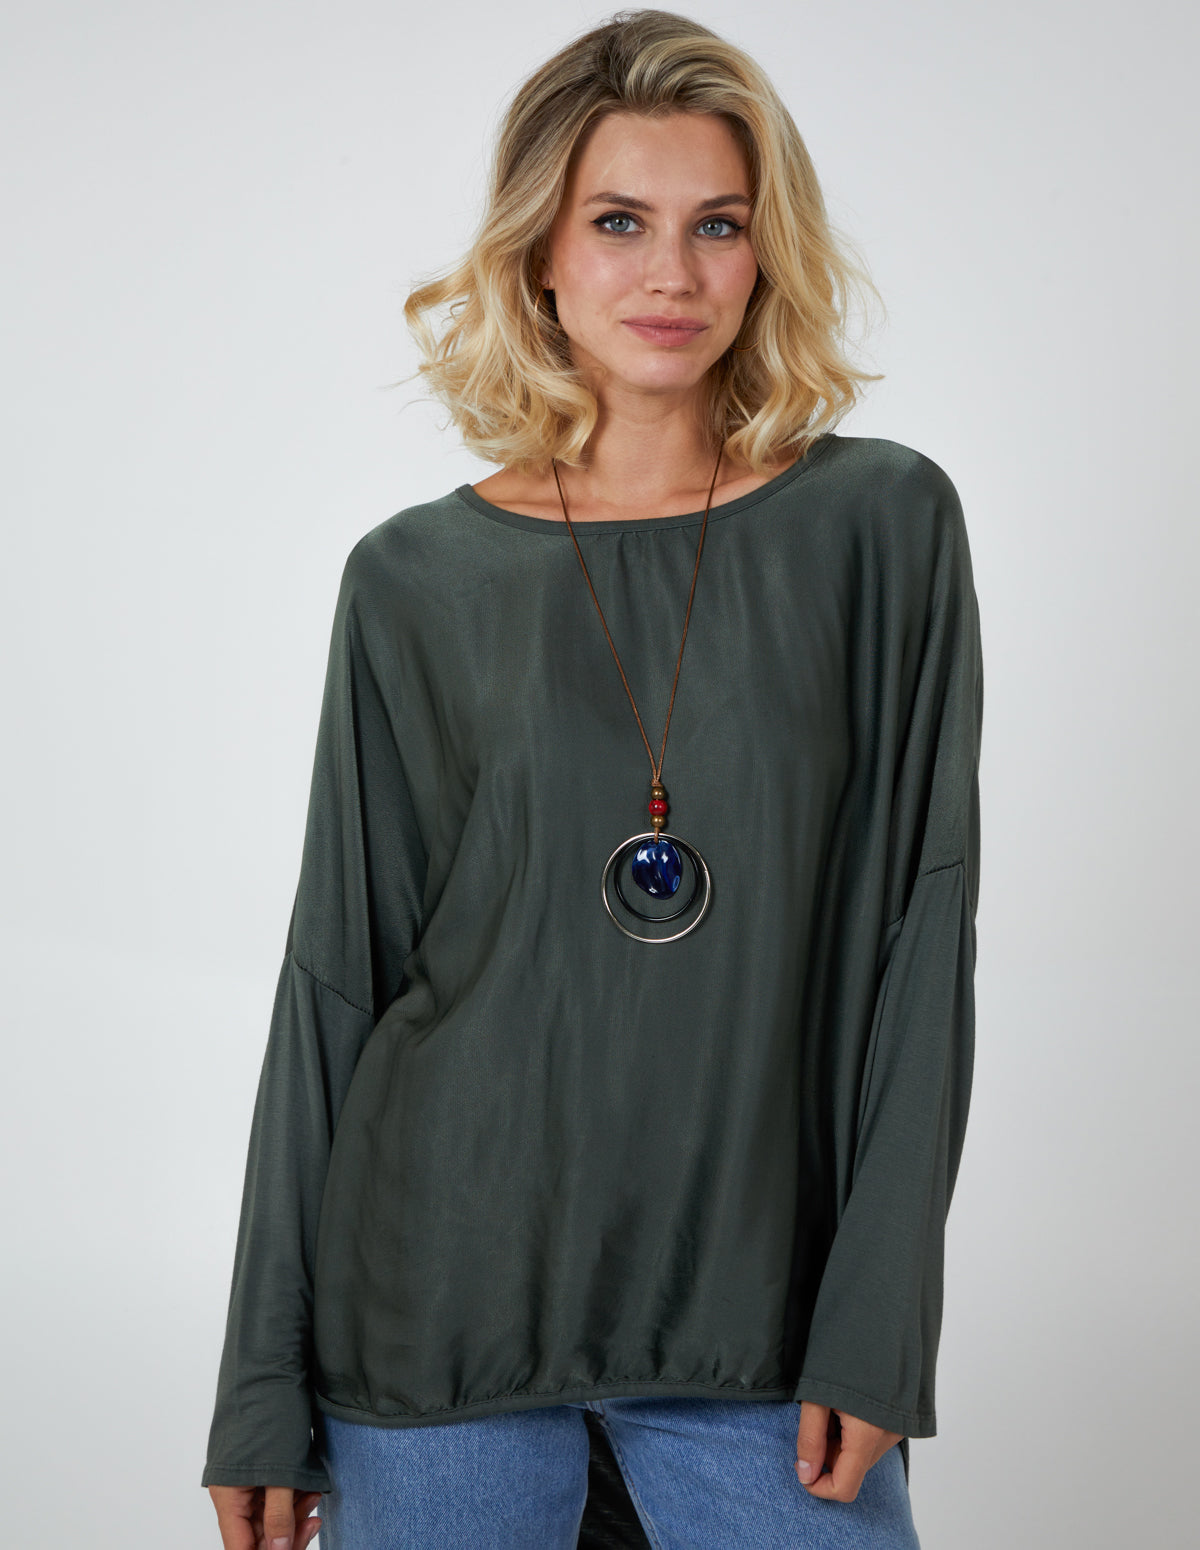 Long Sleeve Satin Feel Necklace Top 